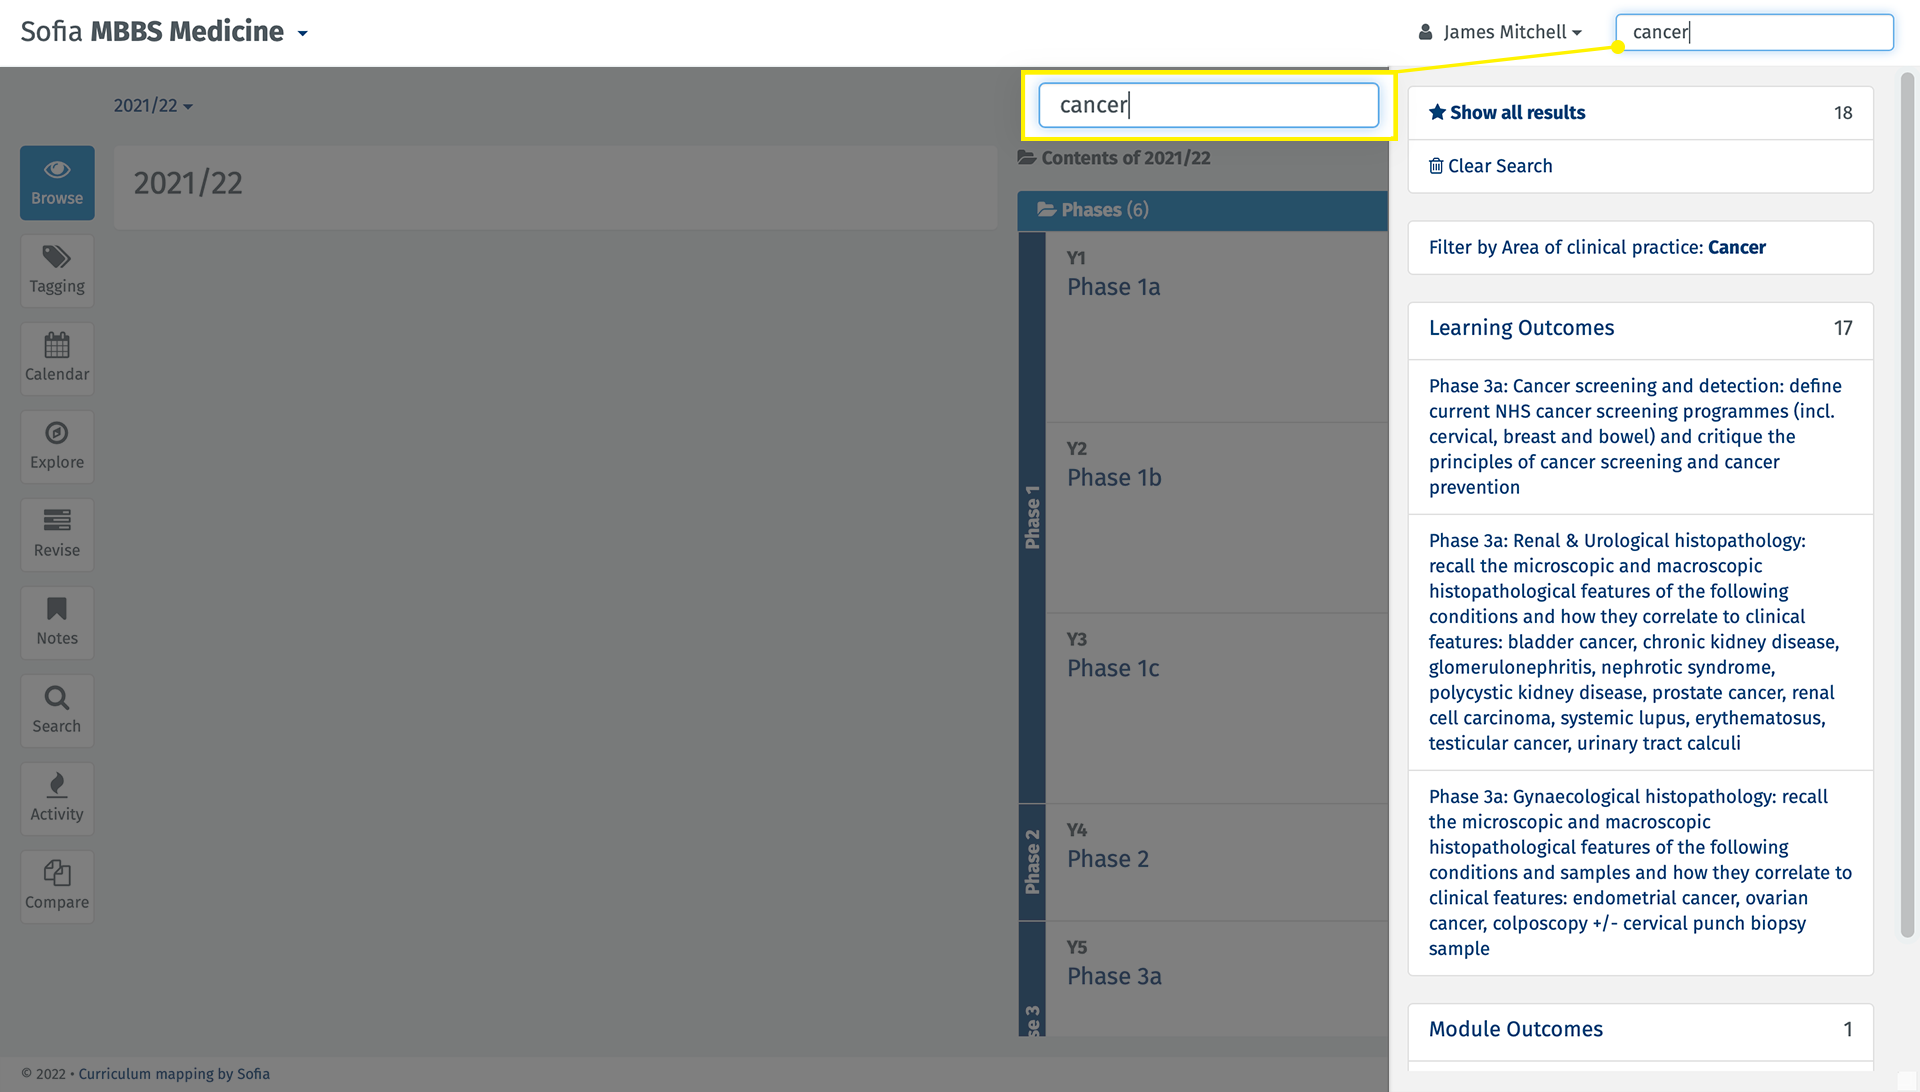 An image showing the Sofia interface on the Revise tab. The 'History & examination' section has been opened, and all the nodes beneath are shown. On the left, all the learning outcomes for History & examination are shown.